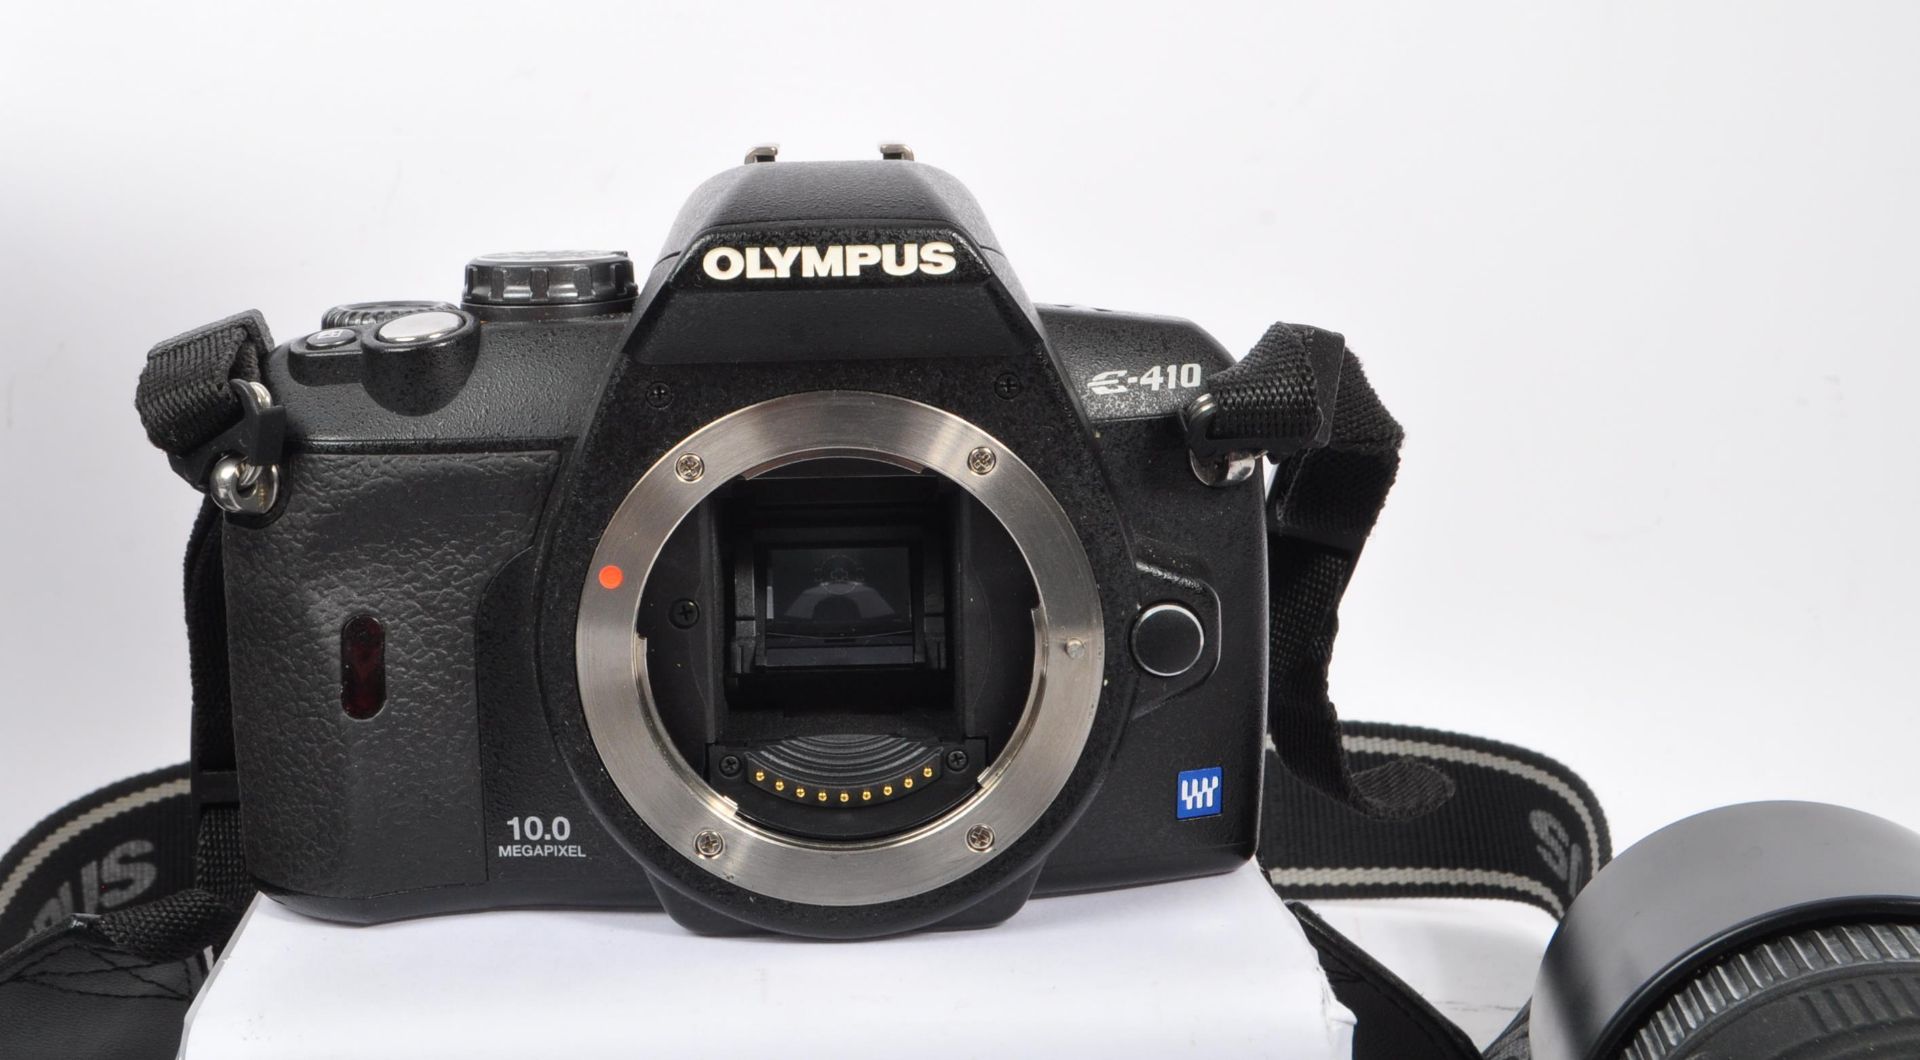 OLYMPUS FOUR THIRDS SYSTEM LENSES AND E-410 - Image 3 of 5